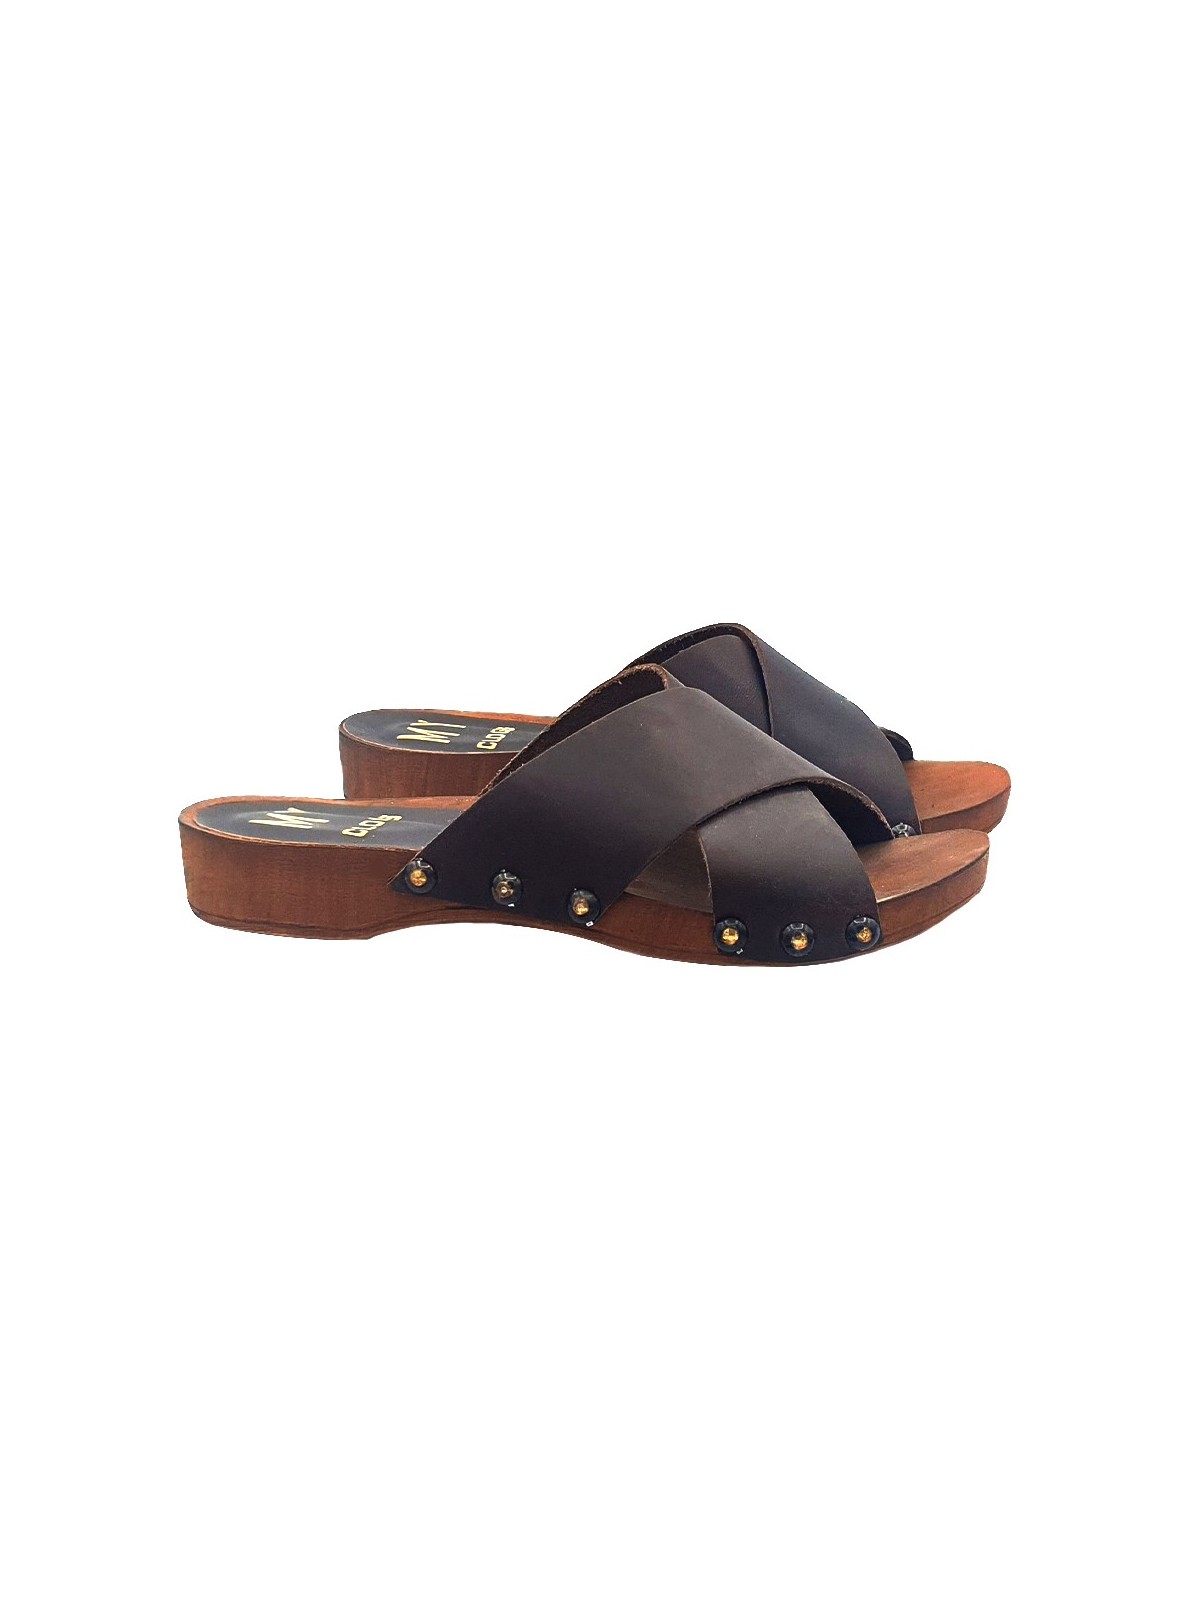 LOW CLOGS WITH CROSSED BROWN LEATHER BANDS